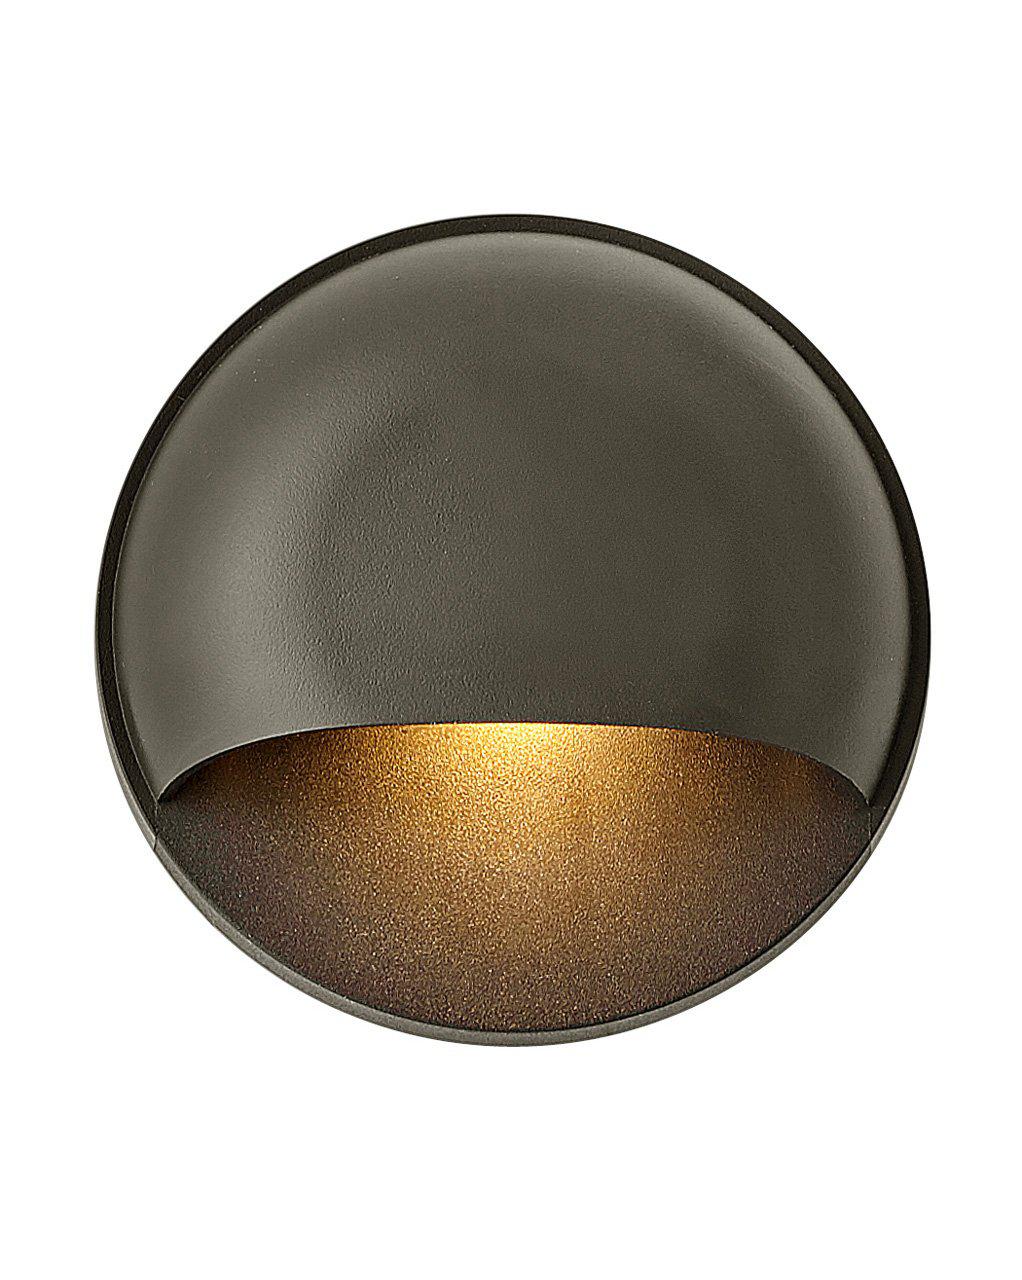 Hinkley  Nuvi Round Deck Sconce Outdoor l Wall Hinkley   